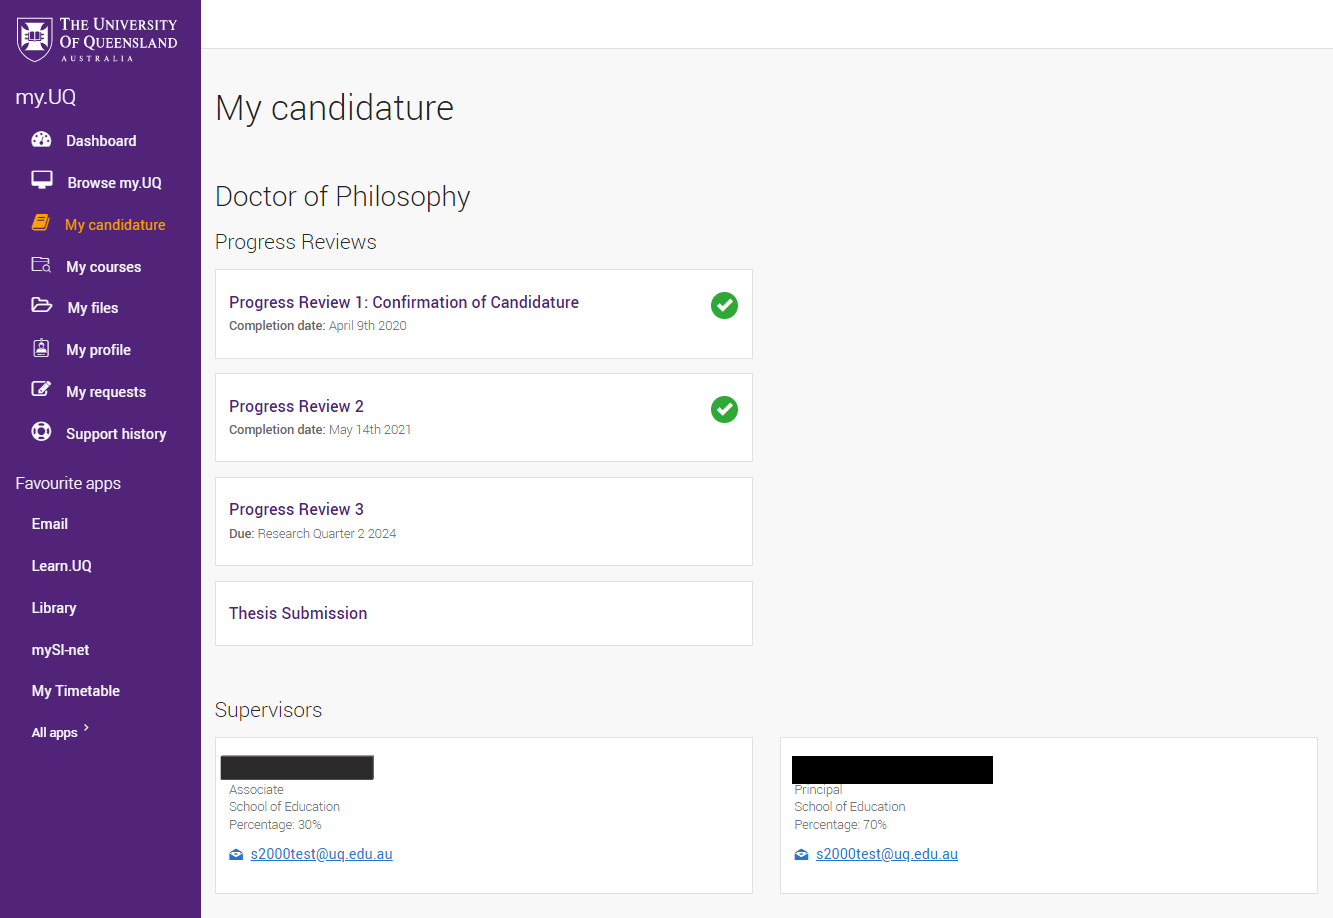 Your candidature dashboard contains details of your progress reviews and advisory team